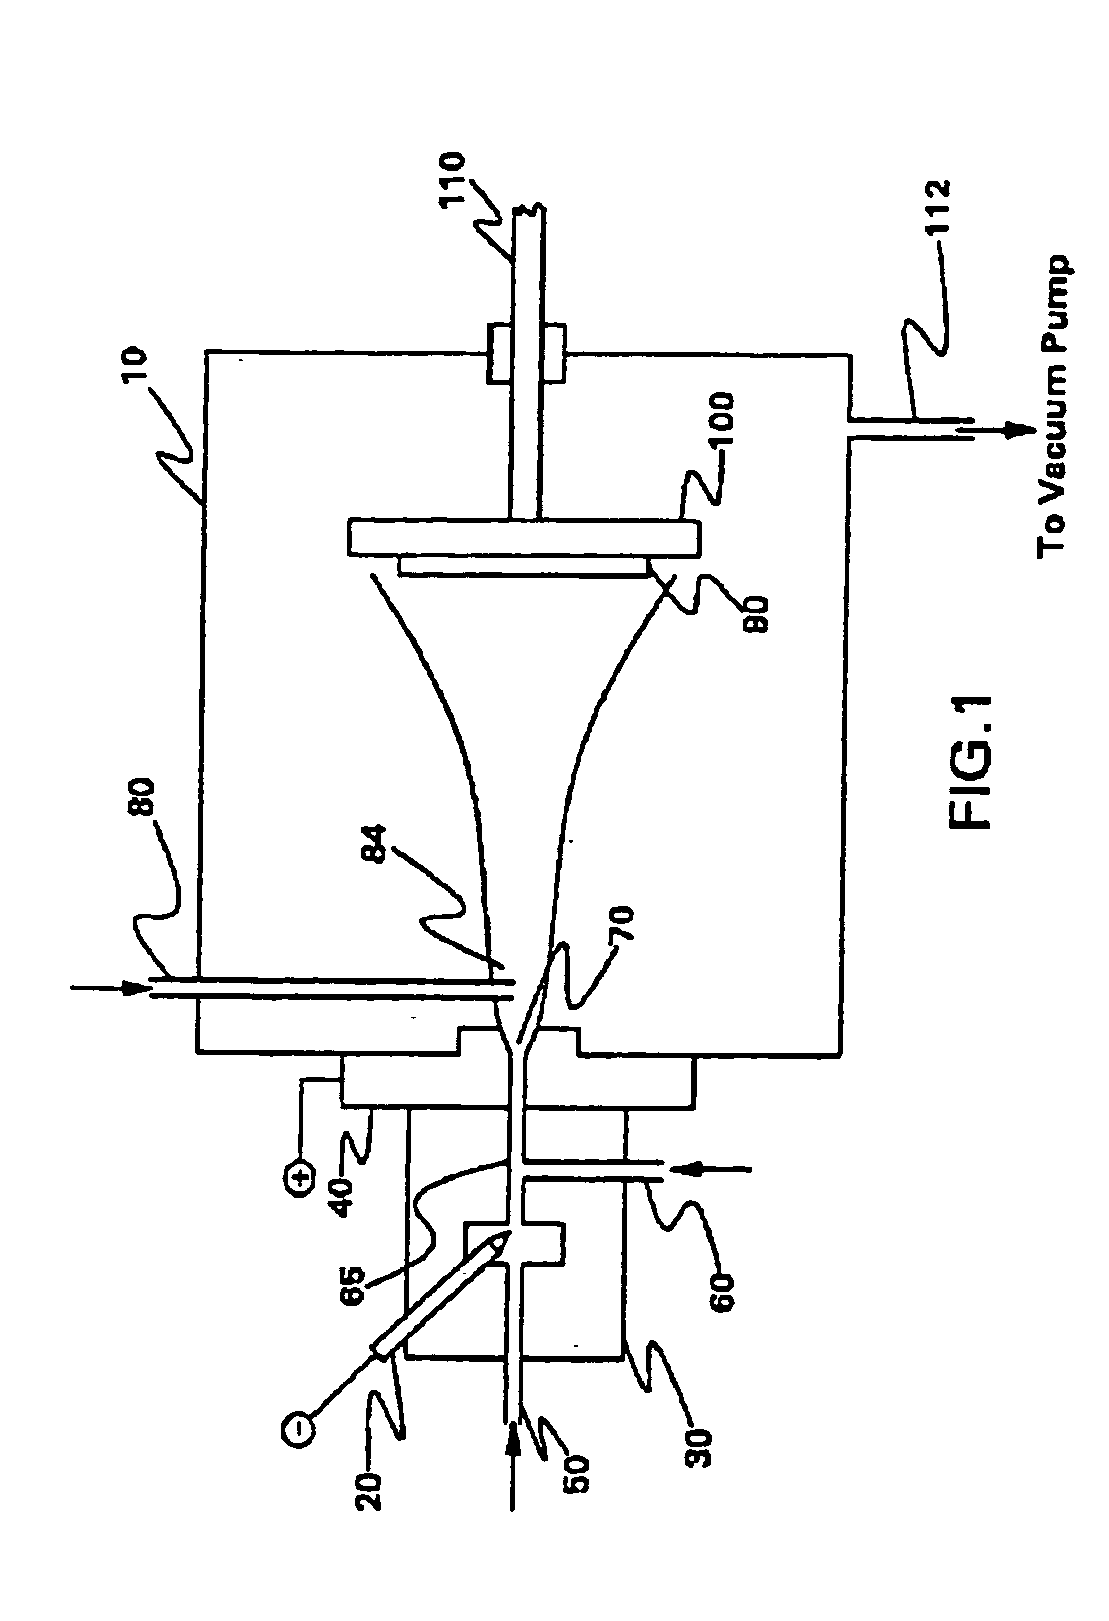 Diffusion barrier coatings having graded compositions and devices incorporating the same